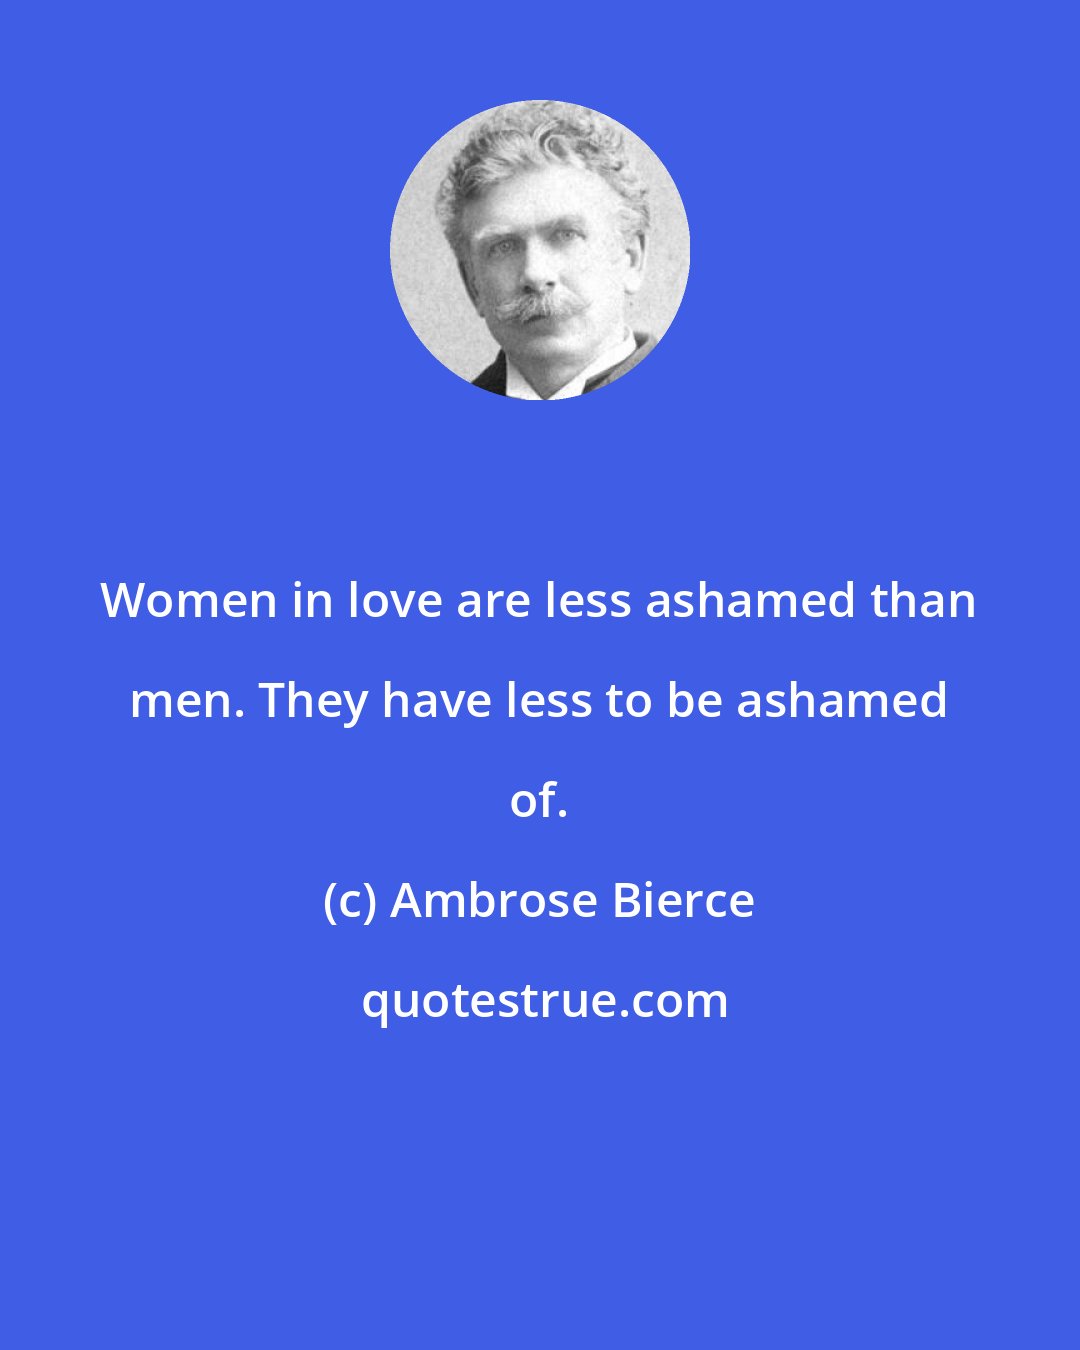 Ambrose Bierce: Women in love are less ashamed than men. They have less to be ashamed of.